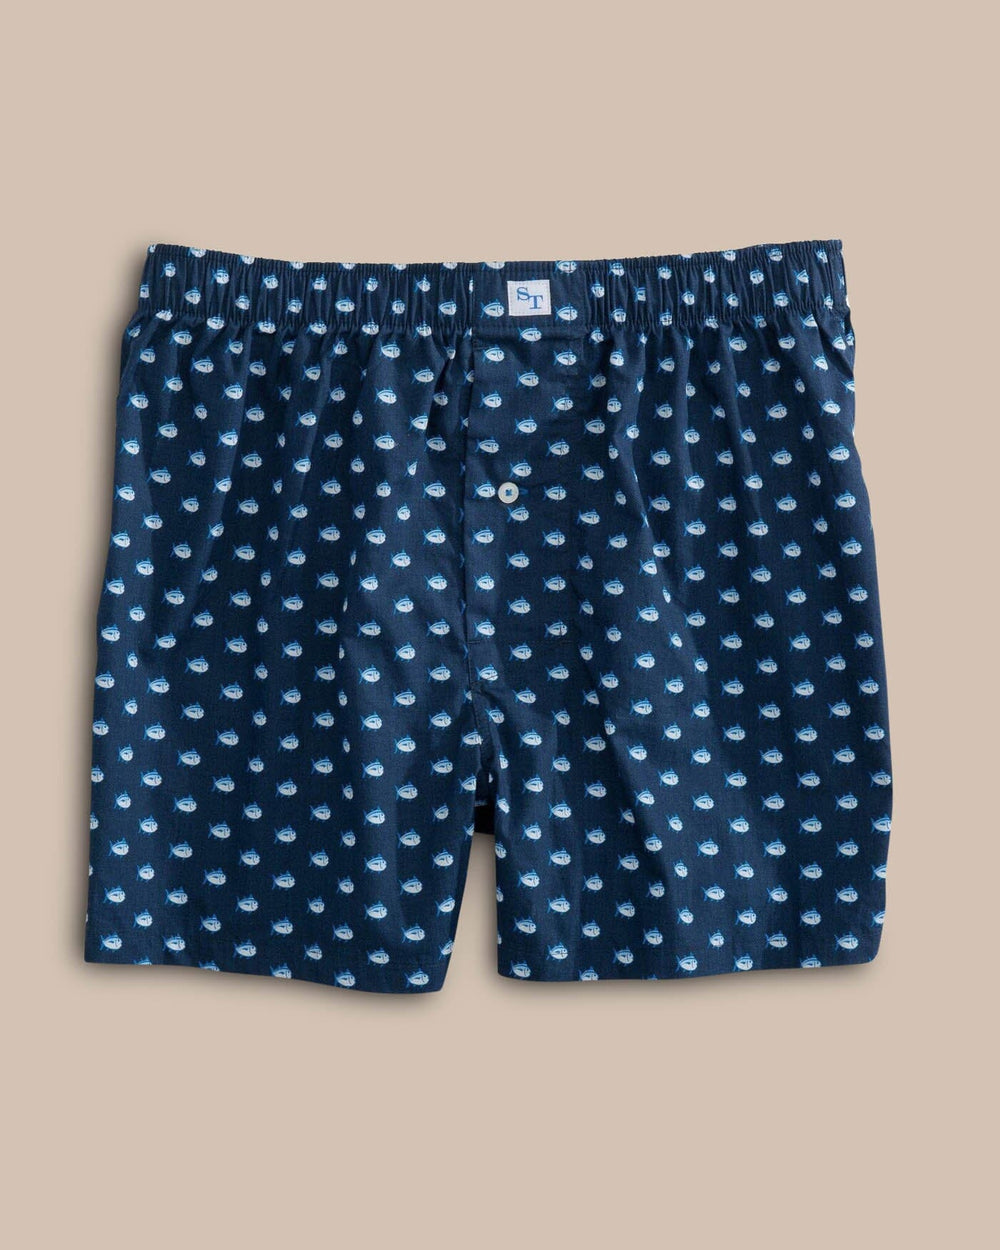 The front view of the Men's Navy Skipjack Boxer Shorts by Southern Tide - True Navy